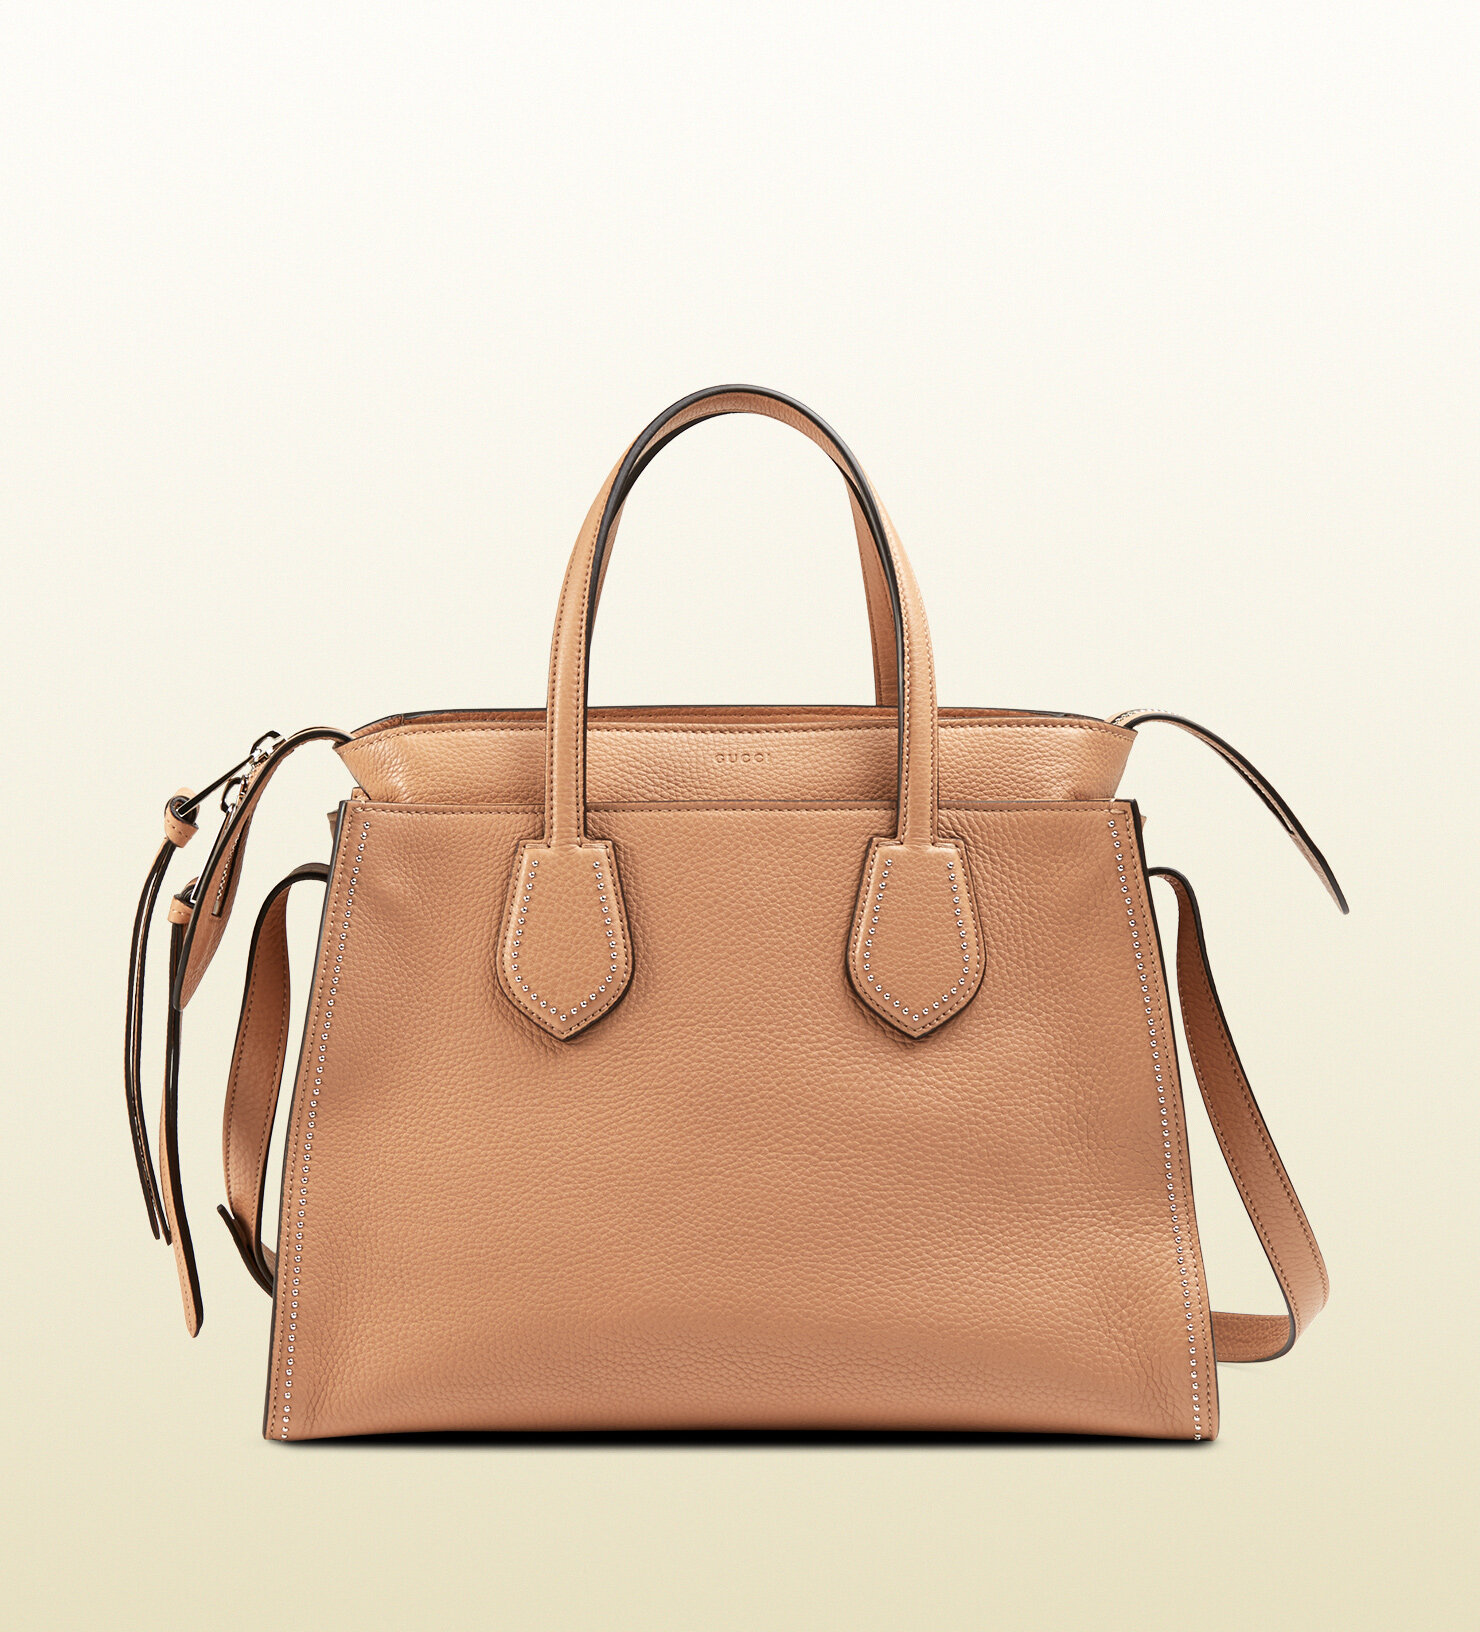 Gucci Ramble Studded Layered Tote in Brown Leather.jpg